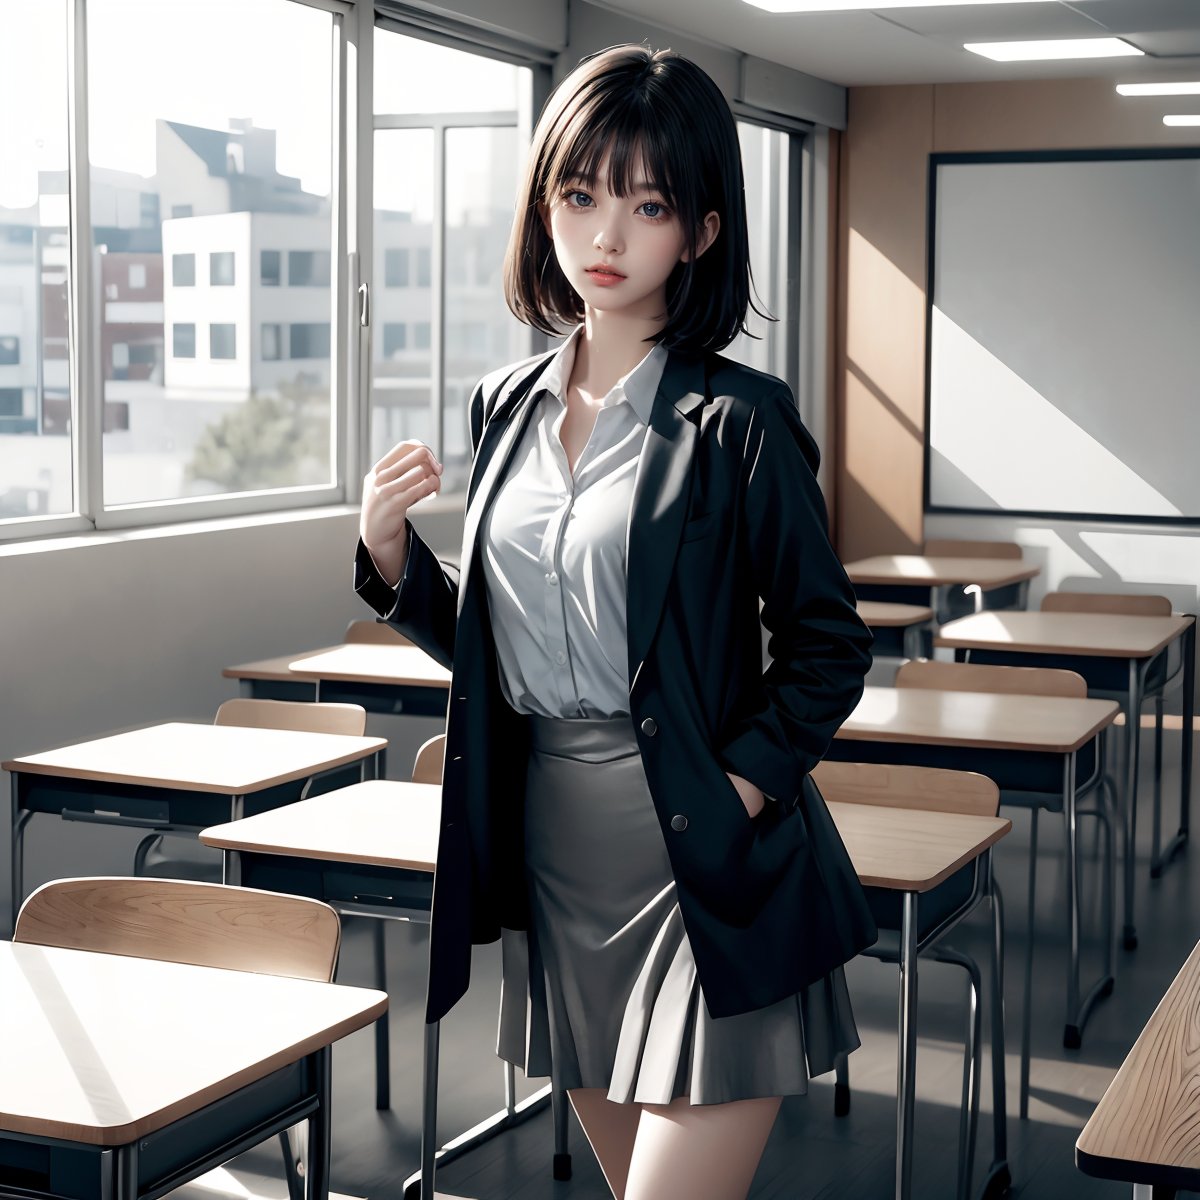 This captivating and visually stunning fractal art depicts a woman. The official art gives her a strong aesthetic appeal: a 19-year-old Japanese woman. Straight black hair, short hair, bangs, dark eyes, small breasts, elongated beautiful legs. 
Gray jacket, gray skirt, white collared shirt, blue tie.
Japanese high school classroom. Standing. Alone. Full shot.